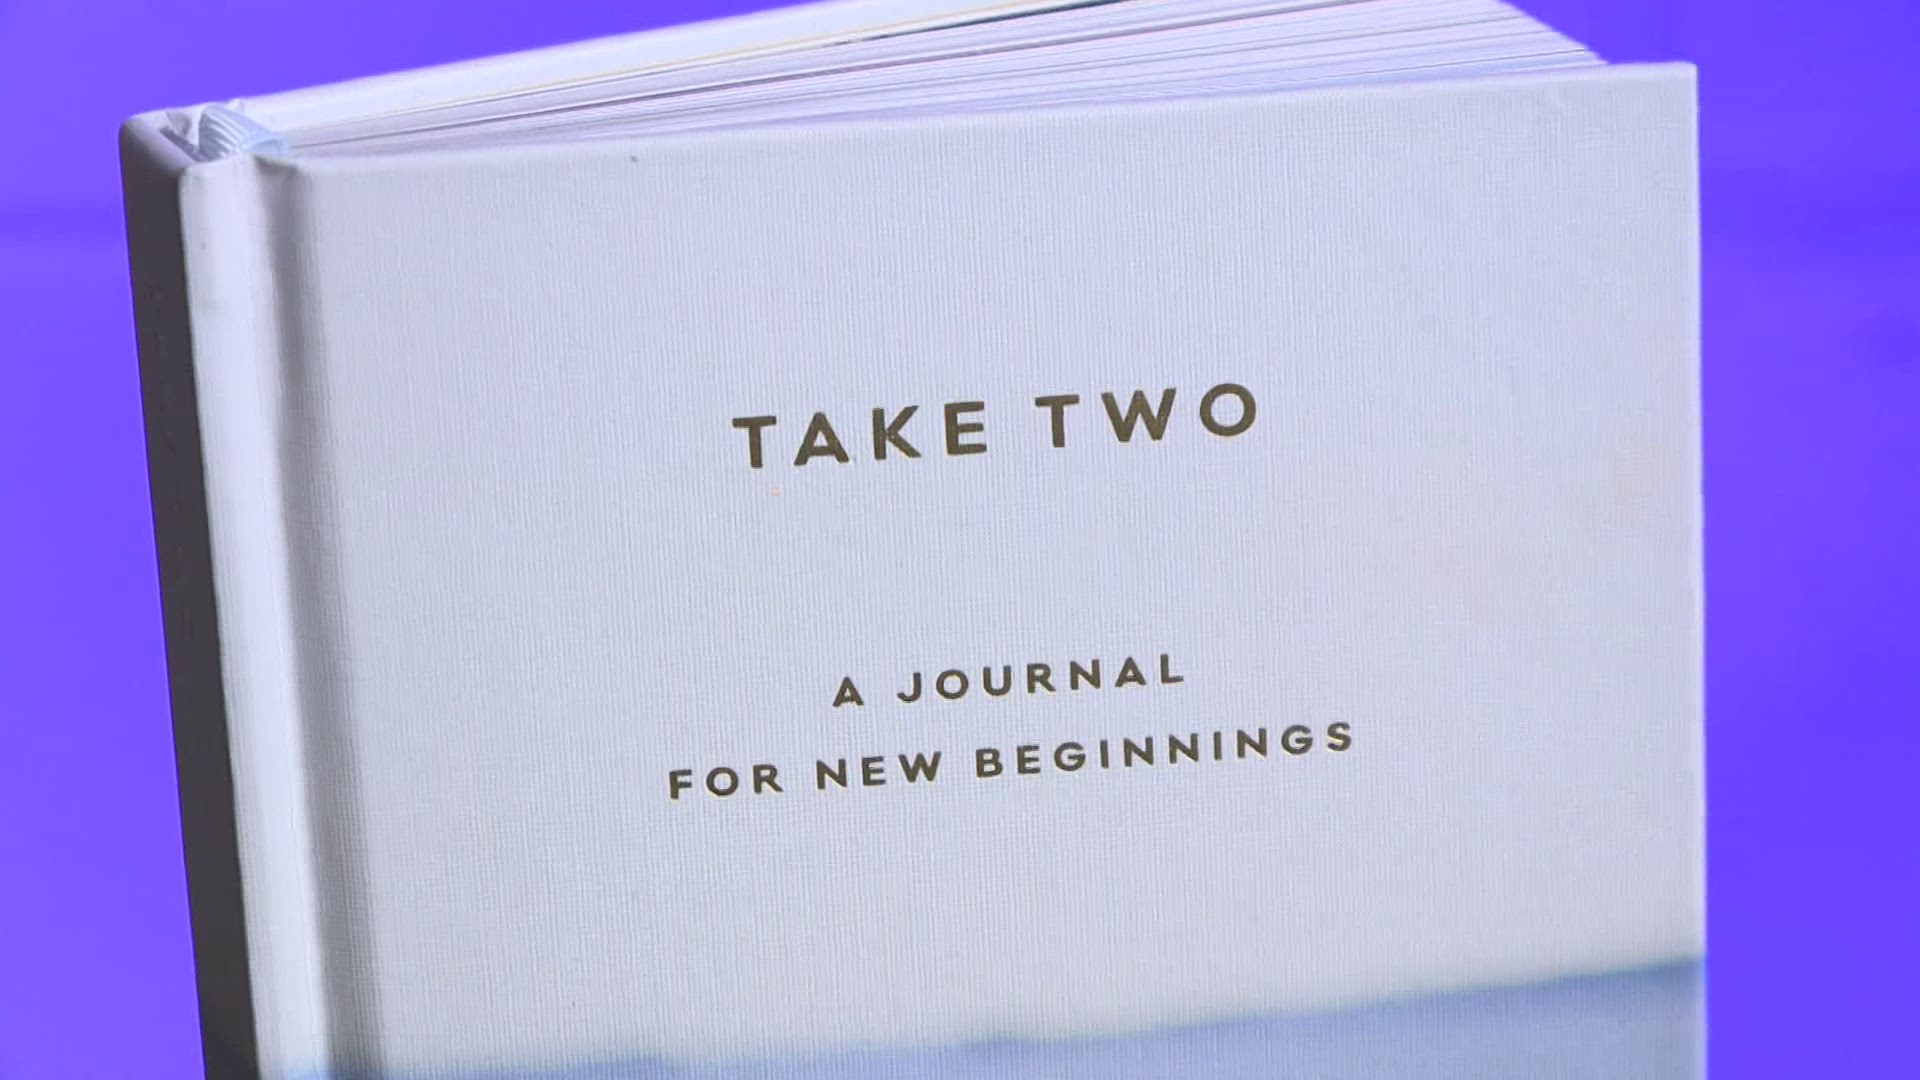 Three friends from Yarmouth never expected to face one of the most challenging moments of their lives together; but it all led to the "Take Two" journal.